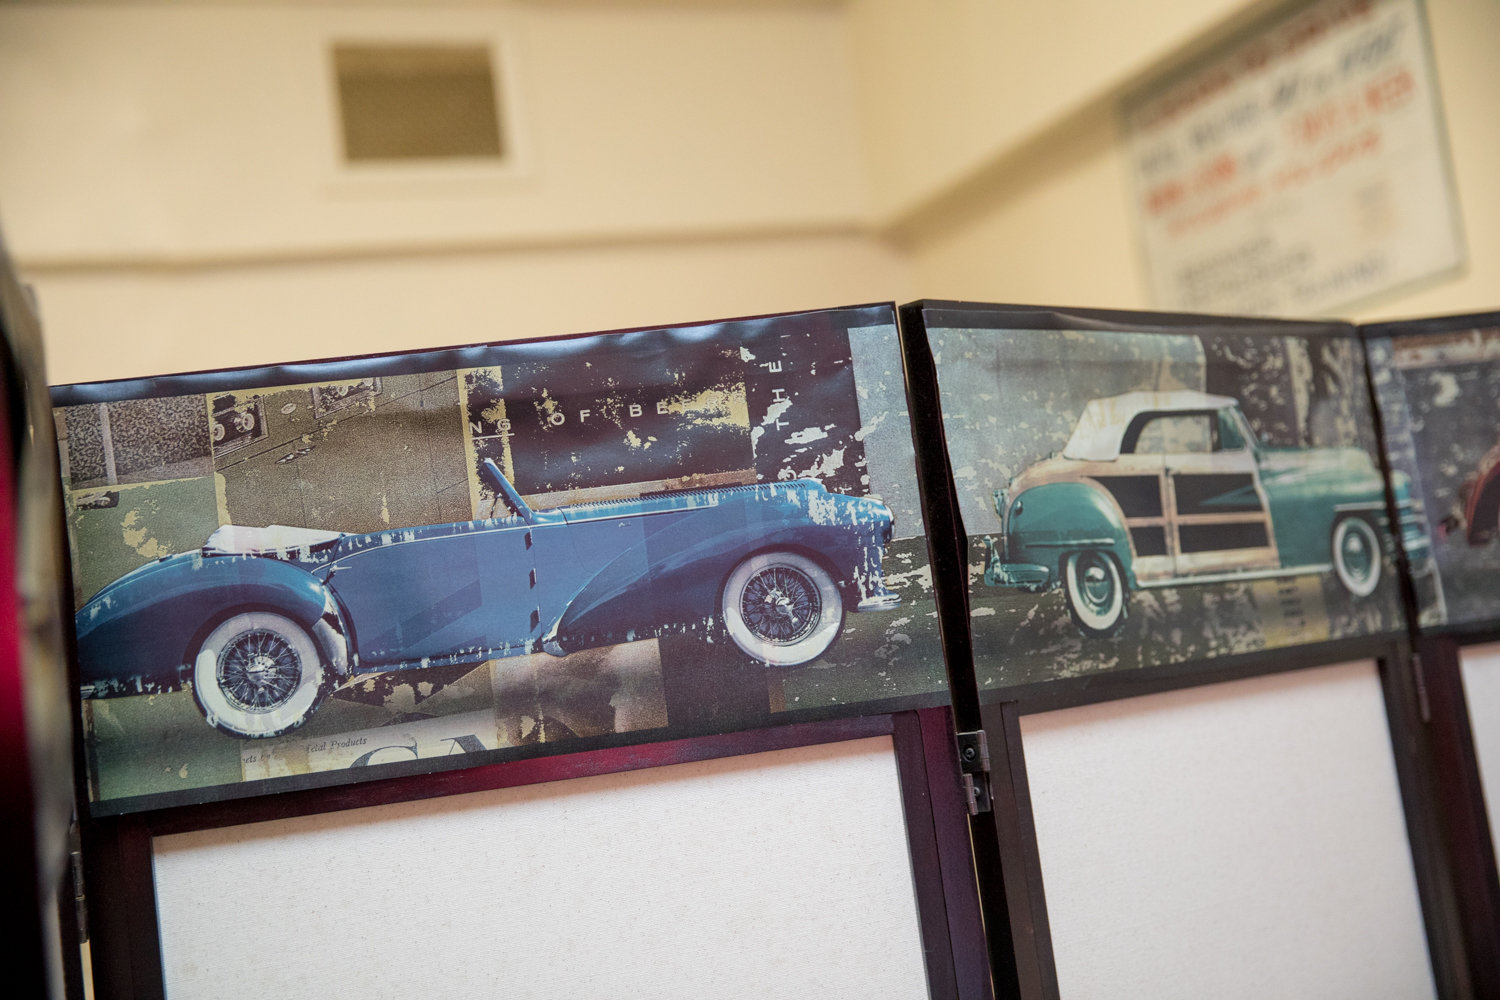 Pictures of vintage cars adorn a divider inside Gotham Driving School on Mosholu Avenue. Irene Goldstein, the school’s owner, isn’t concerned with the state’s new ‘green light’ law that grants undocumented immigrants the ability to get driver’s licenses. Her interest instead is in helping people learn how to drive, regardless of their background.